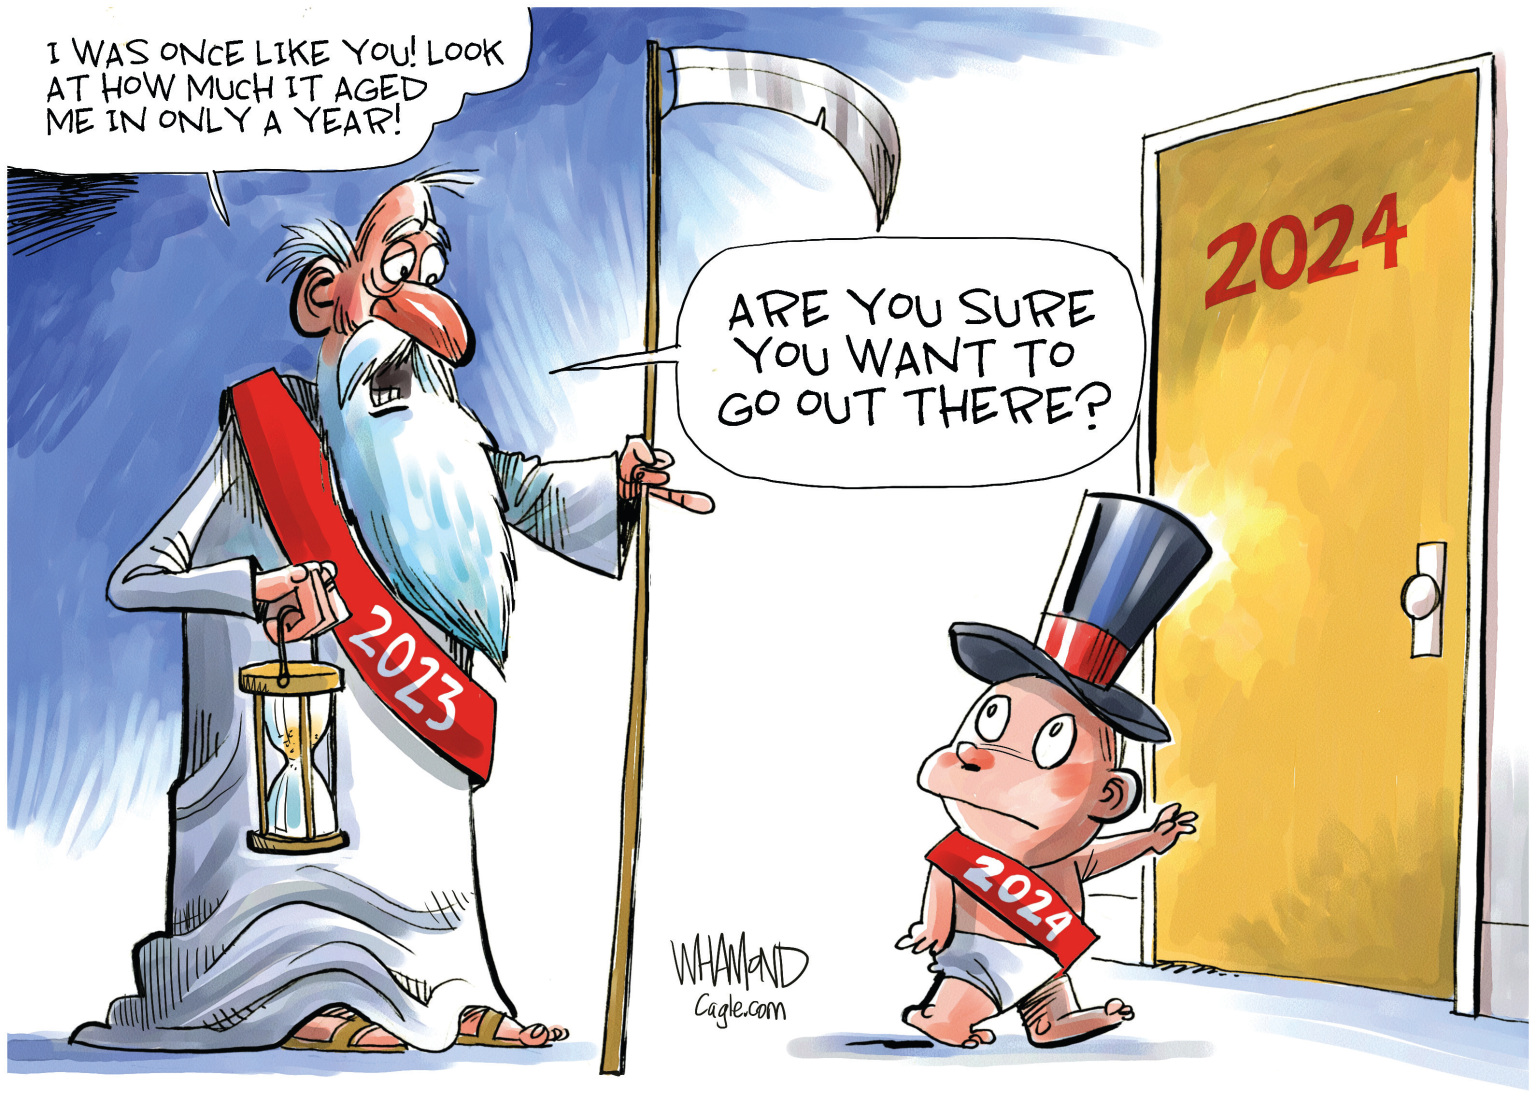 New Years 2024 - By Dave Whamond